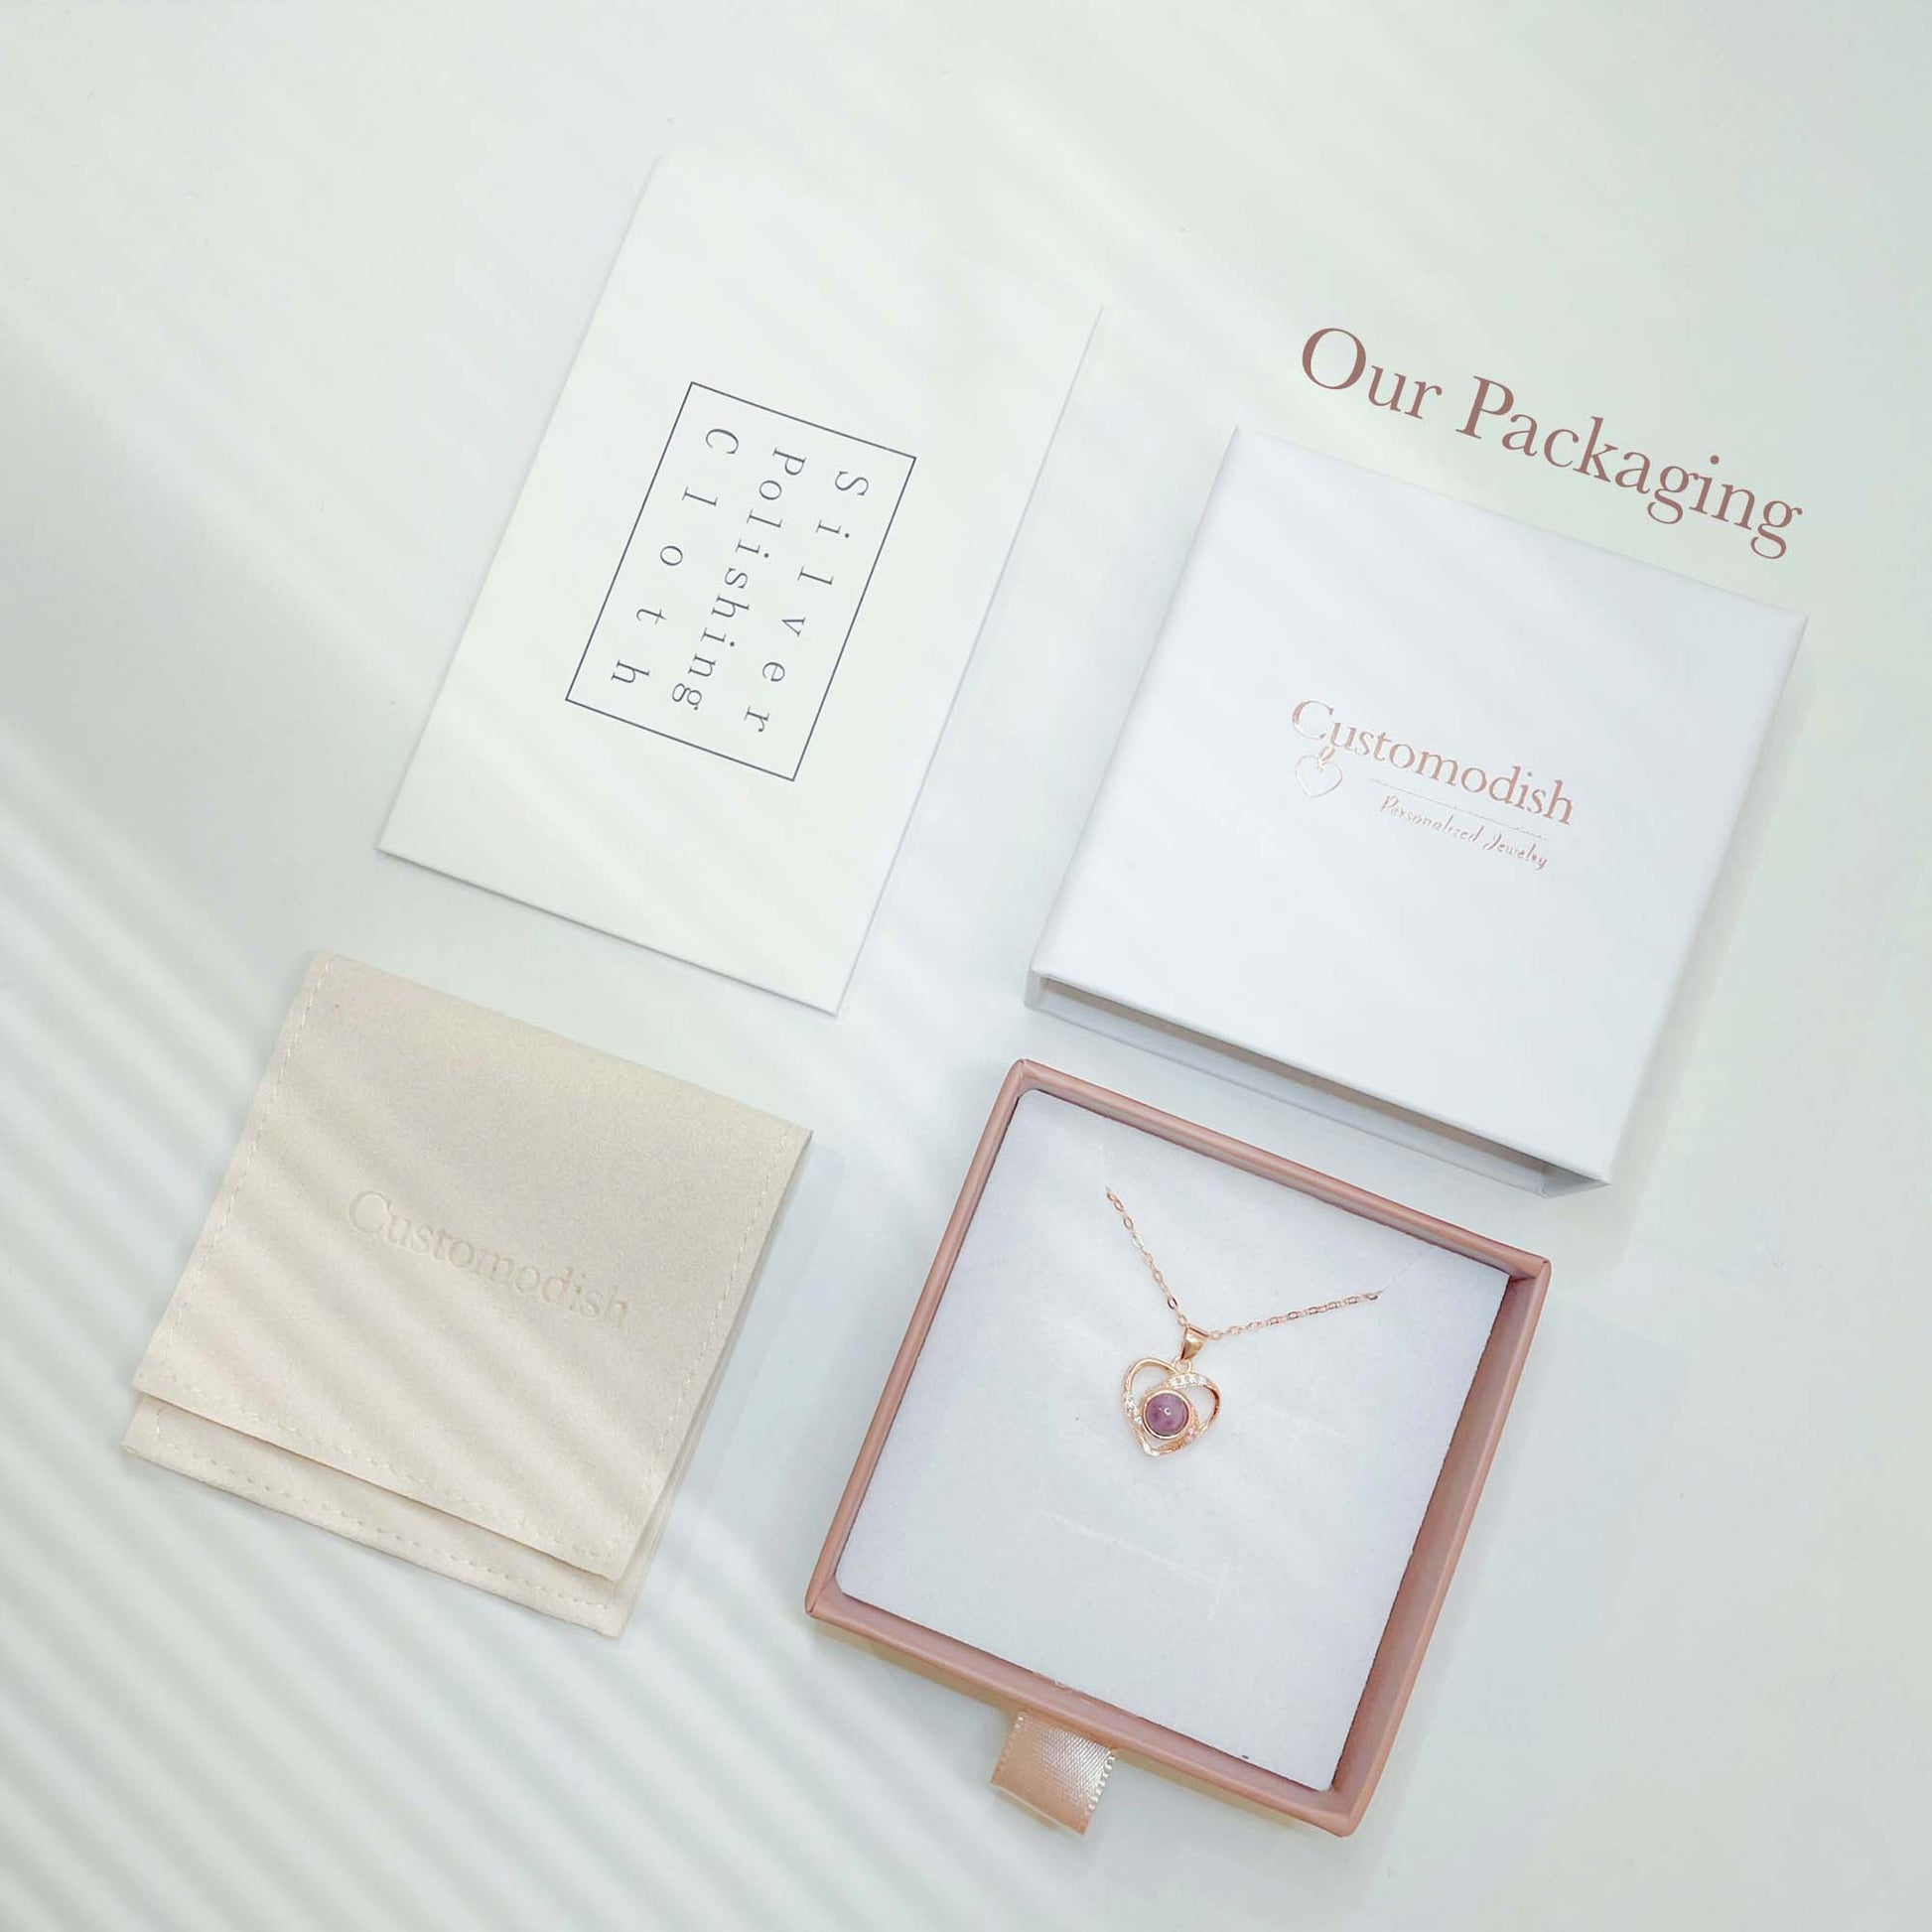 All our projection jewelry come with a Customodish box that is perfect for gifting.